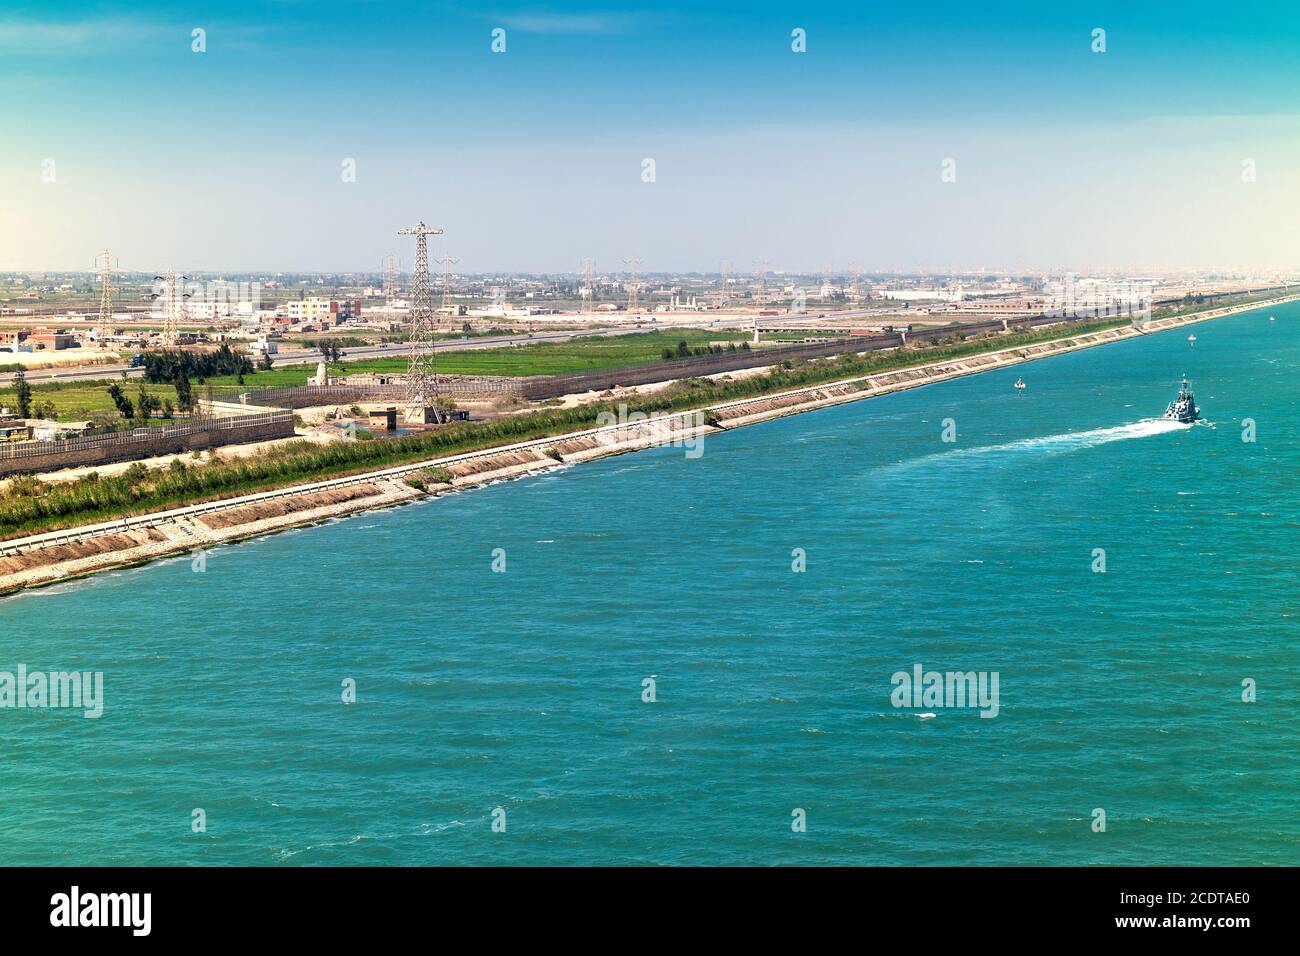 Exit from the Suez Canal into the Mediterranean along the port cities of Port Said and Port Fouad Stock Photo